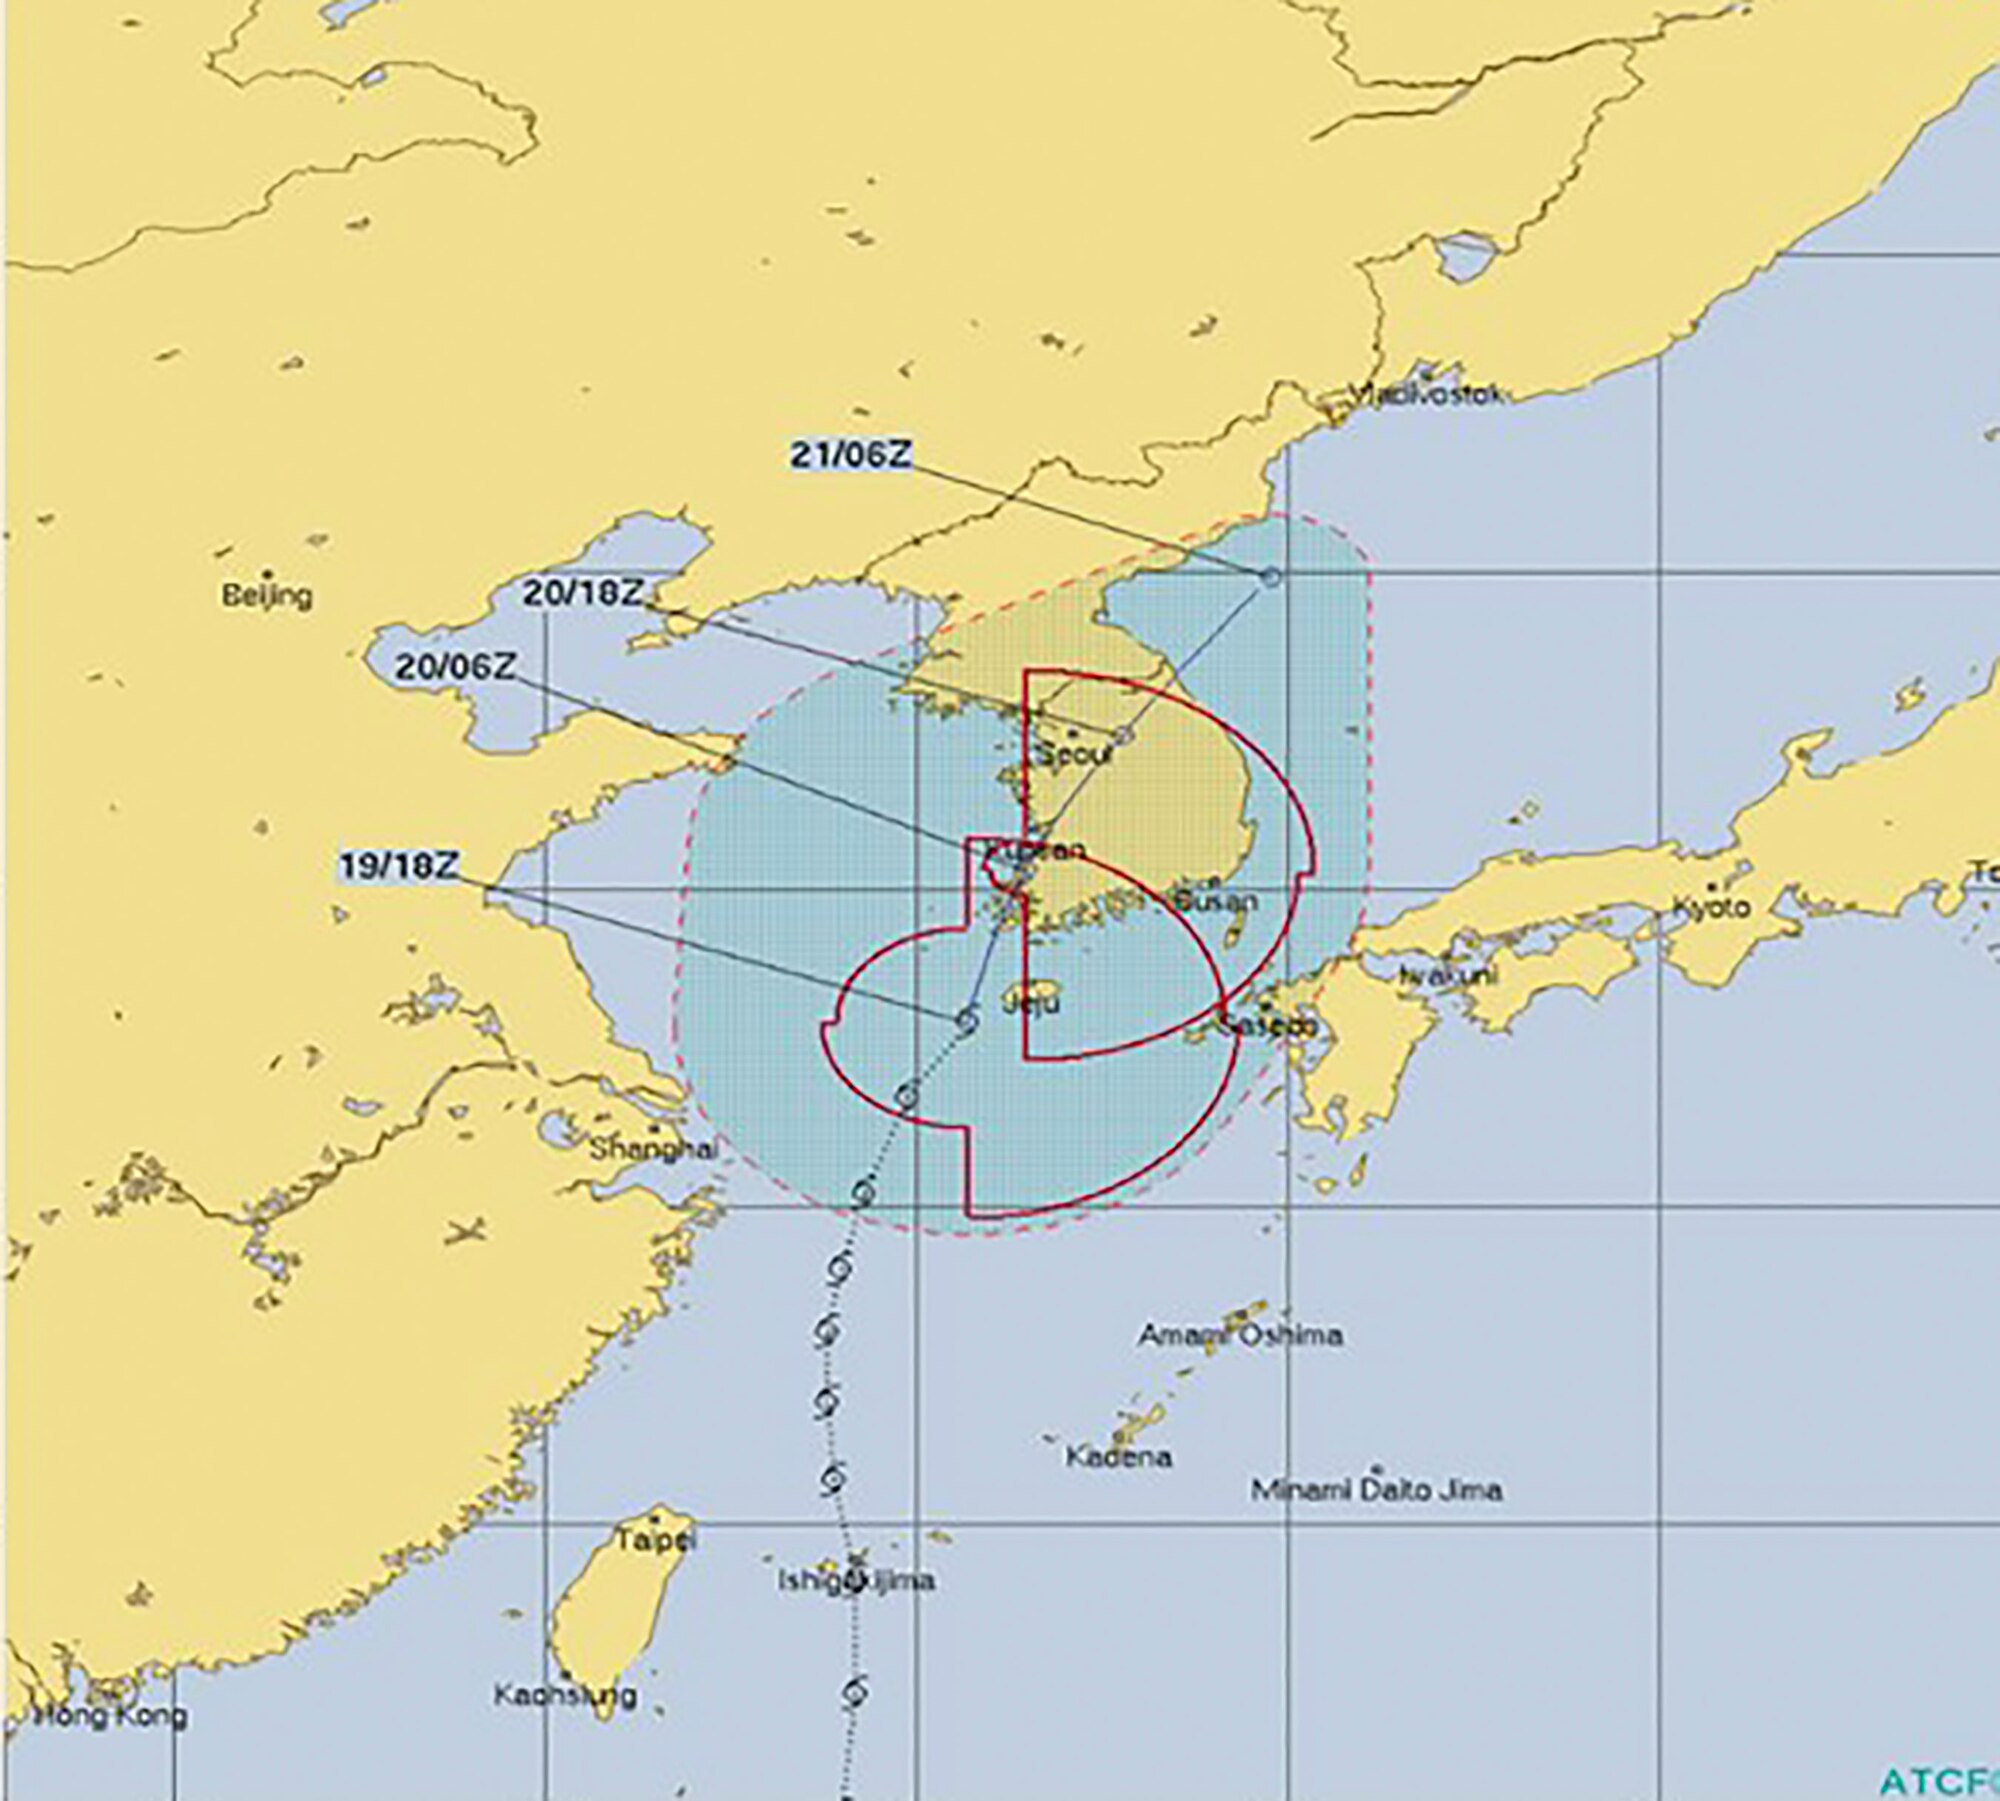 Tropical Storm Danas advances towards the western North Pacific during typhoon season, July 19, 2019. This region annually experiences tropical cyclone effects between June and October. For Osan Air Base and the surrounding Korean Peninsula, the 51st Civil Engineer Squadron’s Emergency Management flight provides response and recovery crisis management and the 51st Operations Support Squadron’s weather flight forecasts climate to keep the installation’s personnel and assets equipped to survive a storm and other natural disasters. (Courtesy photo)